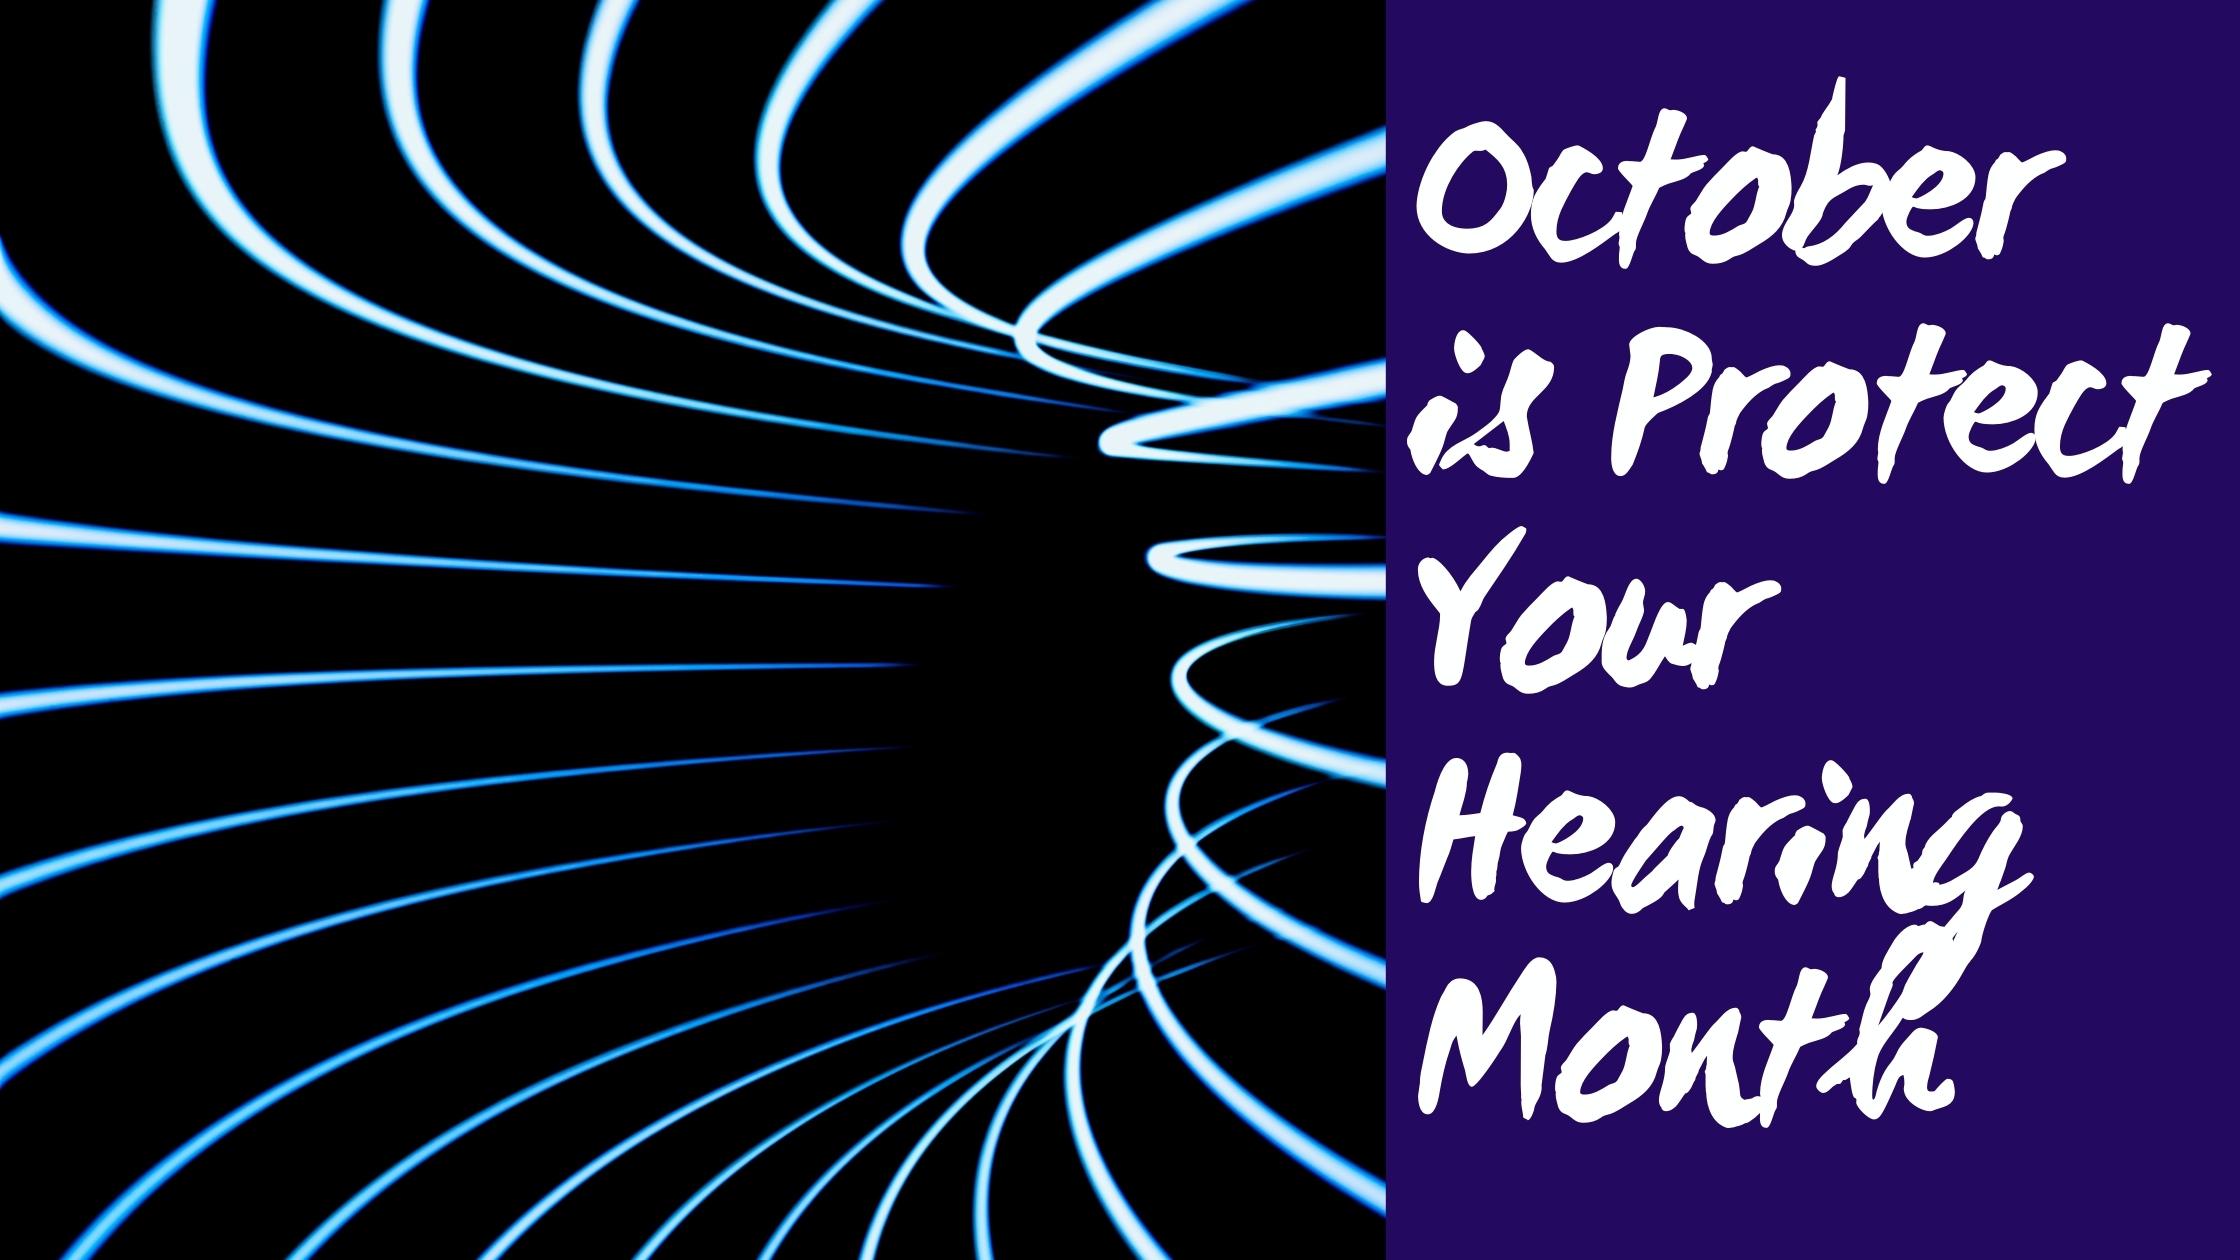 October is protect your hearing month